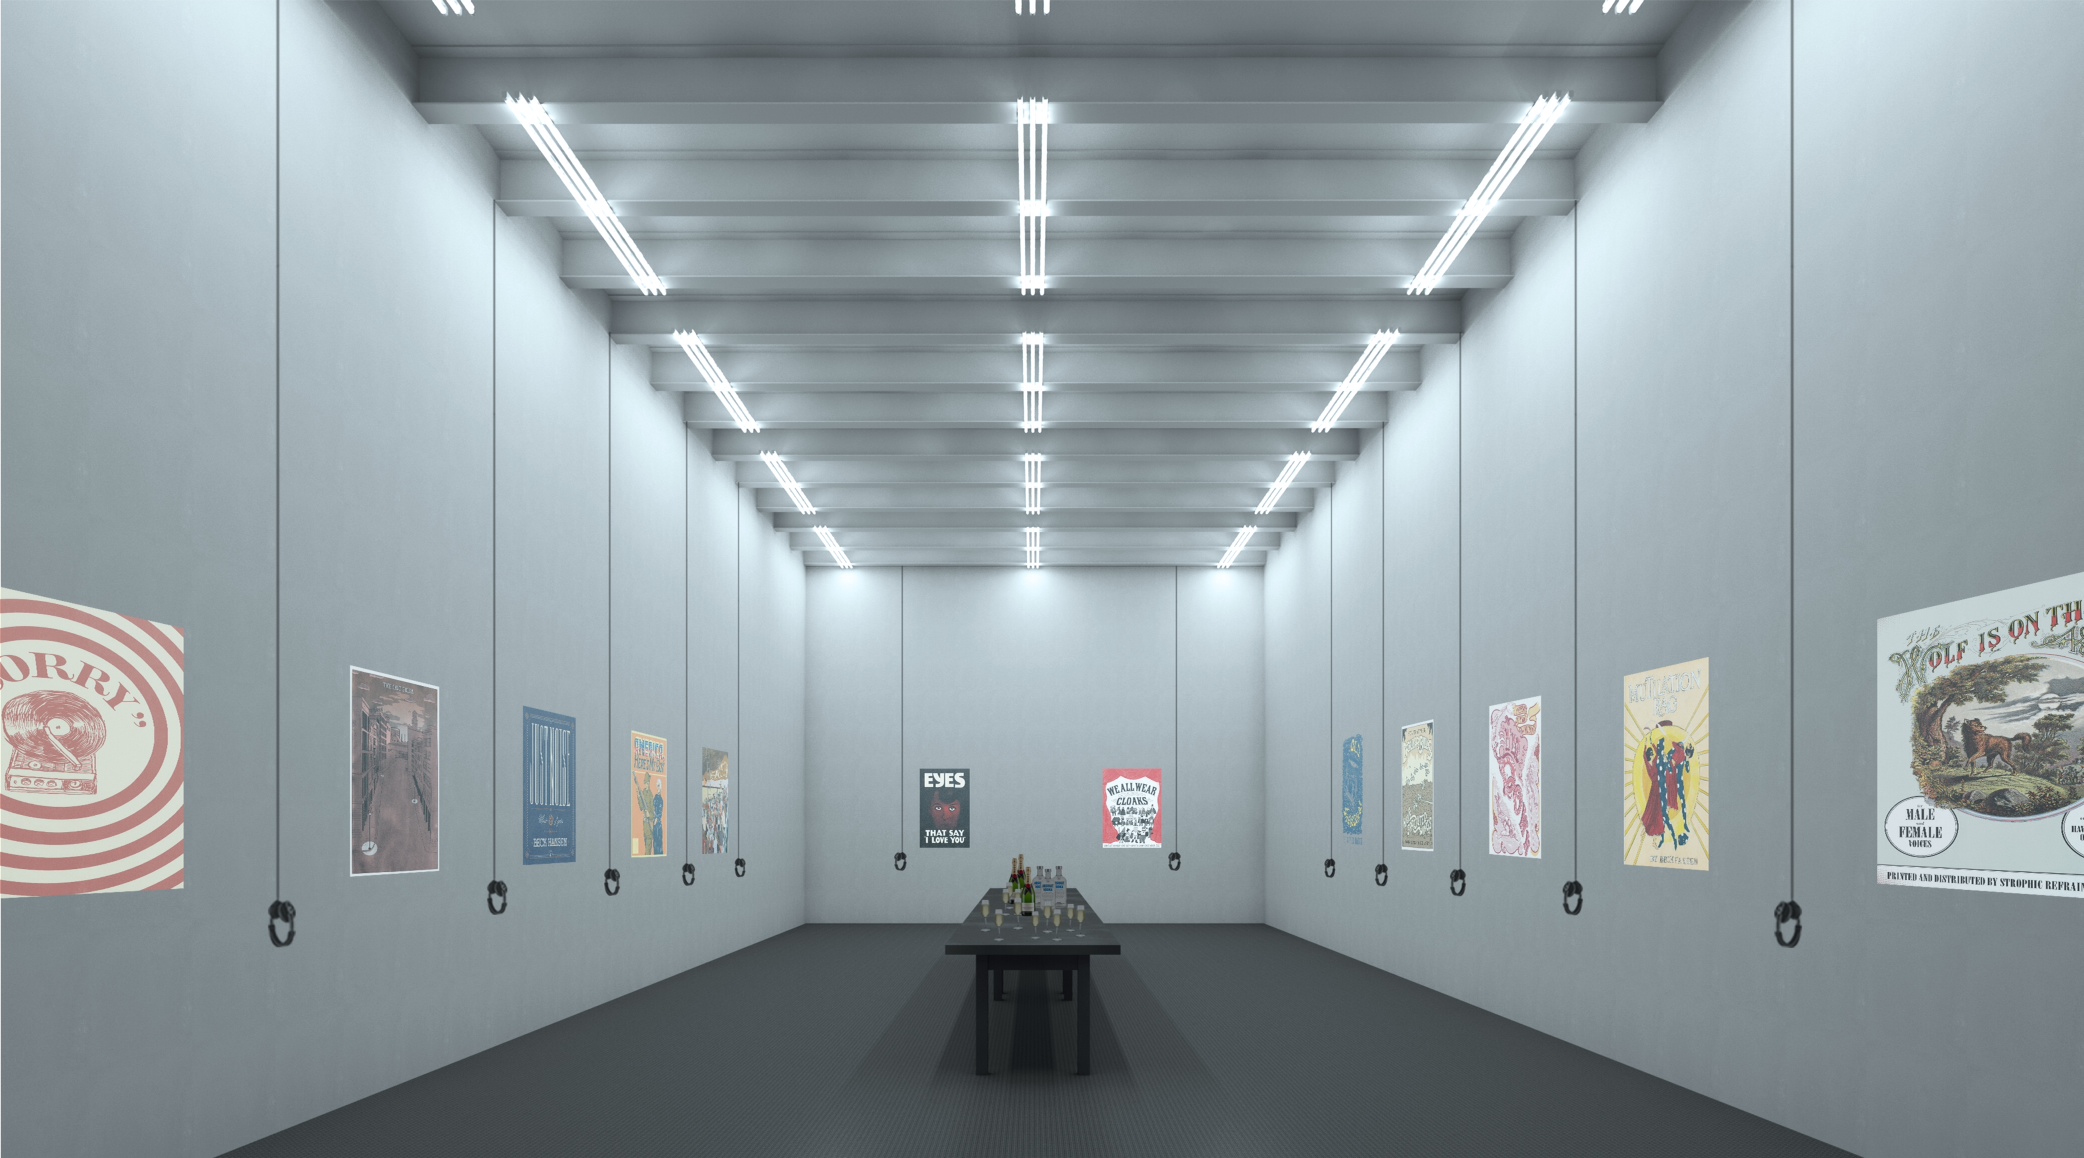 Virtual rendering of Whitebox Art Center space for private event